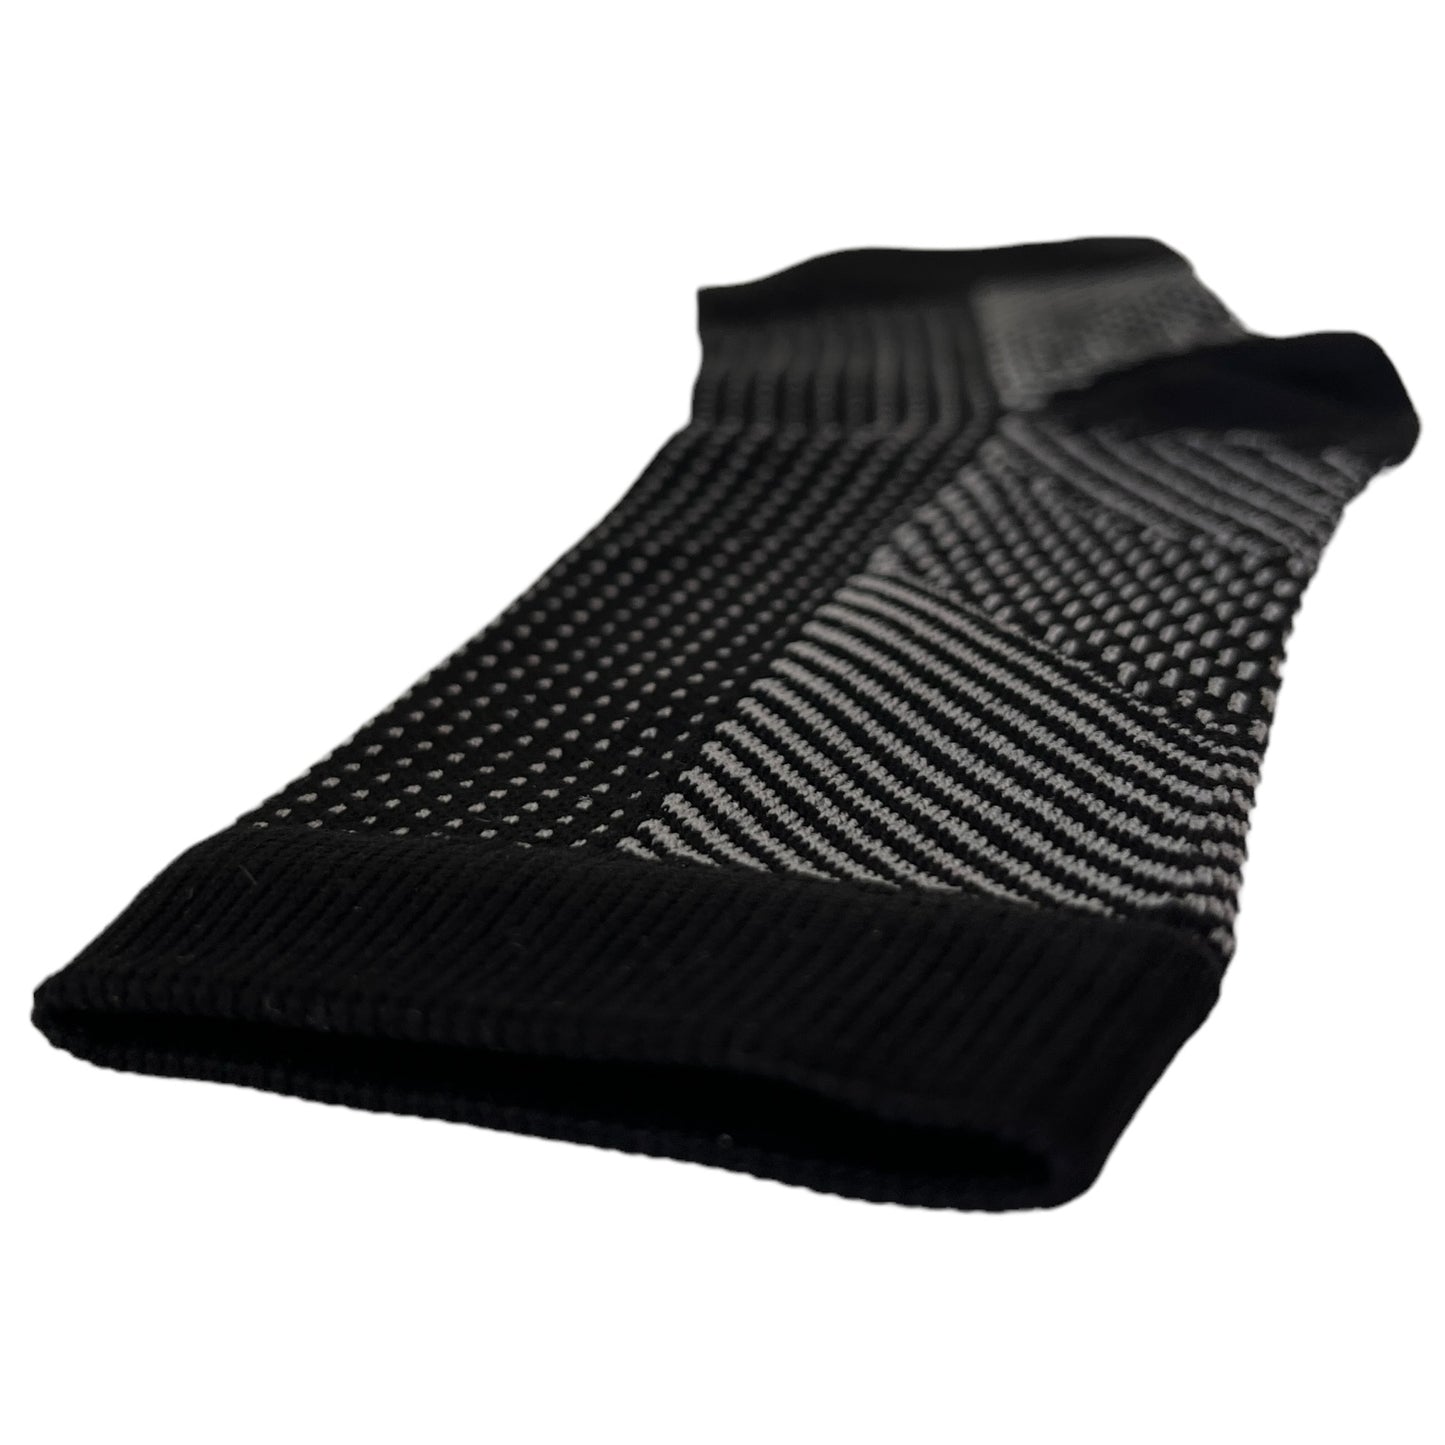 Compression Sleeve — Ankle Supports & Braces SPIRIT SPARKPLUGS   